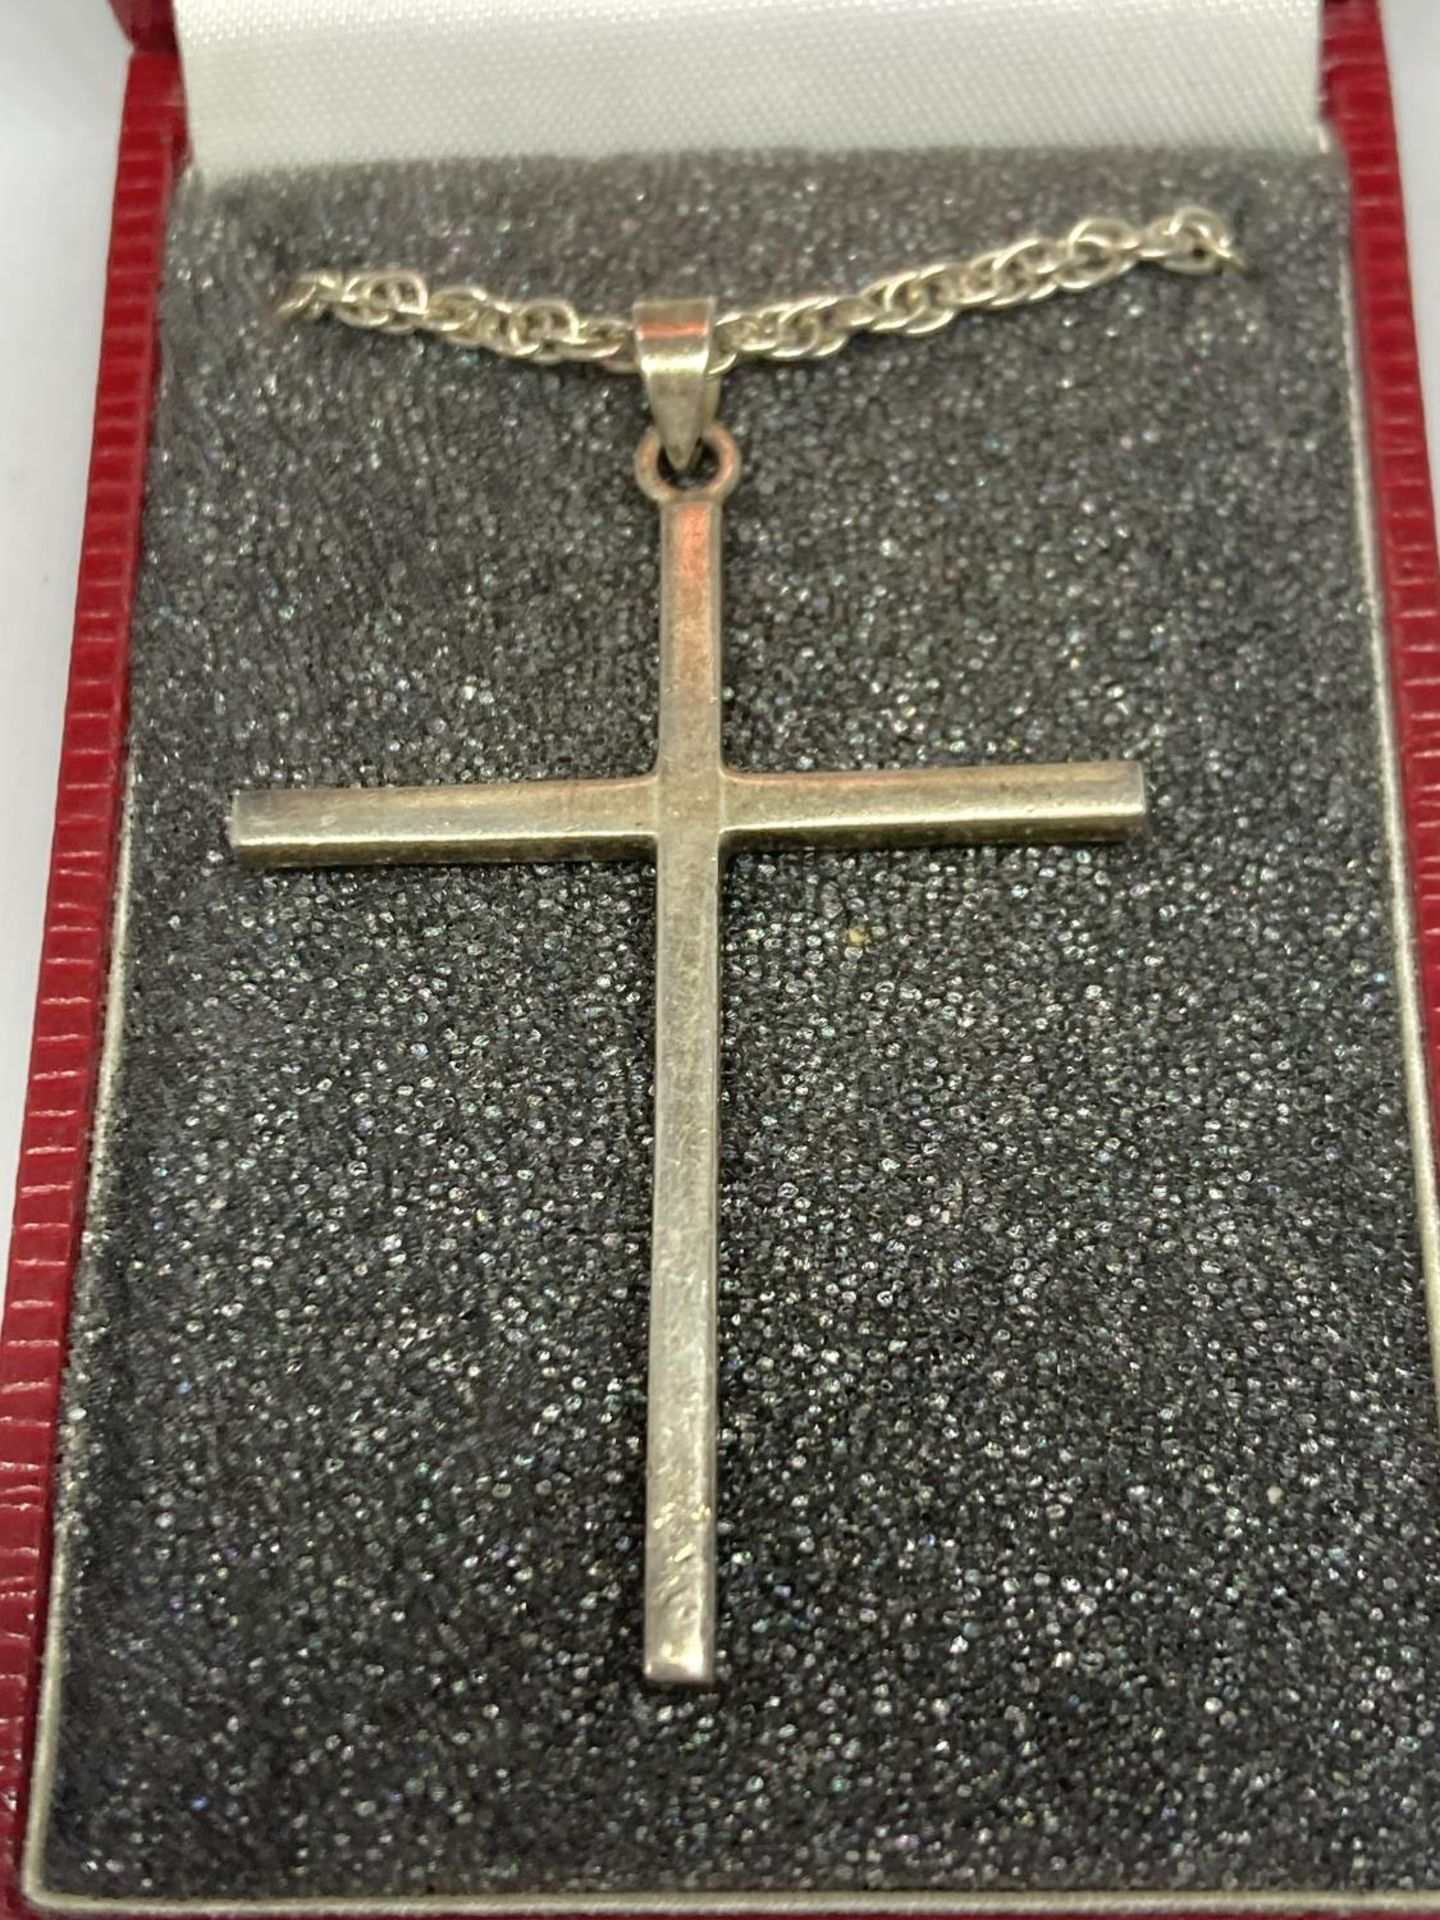 A SILVER CROSS AND CHAIN IN A PRESENTATION BOX - Image 2 of 3